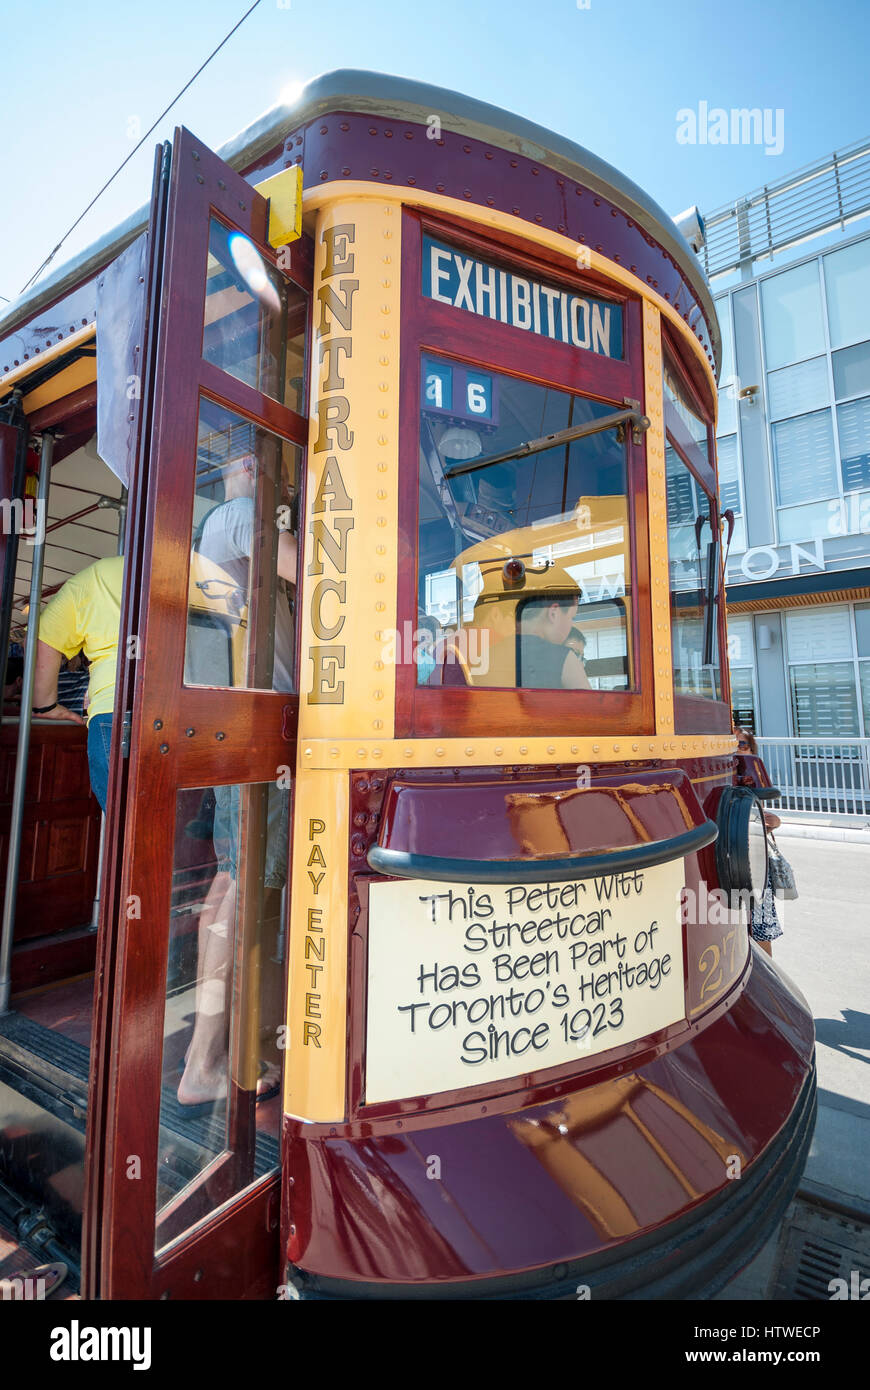 The last remaining Peter Witt streetcar in the Toronto Transit Commission is still functioning and on display at the Leslie street barns in Toronto. Stock Photo